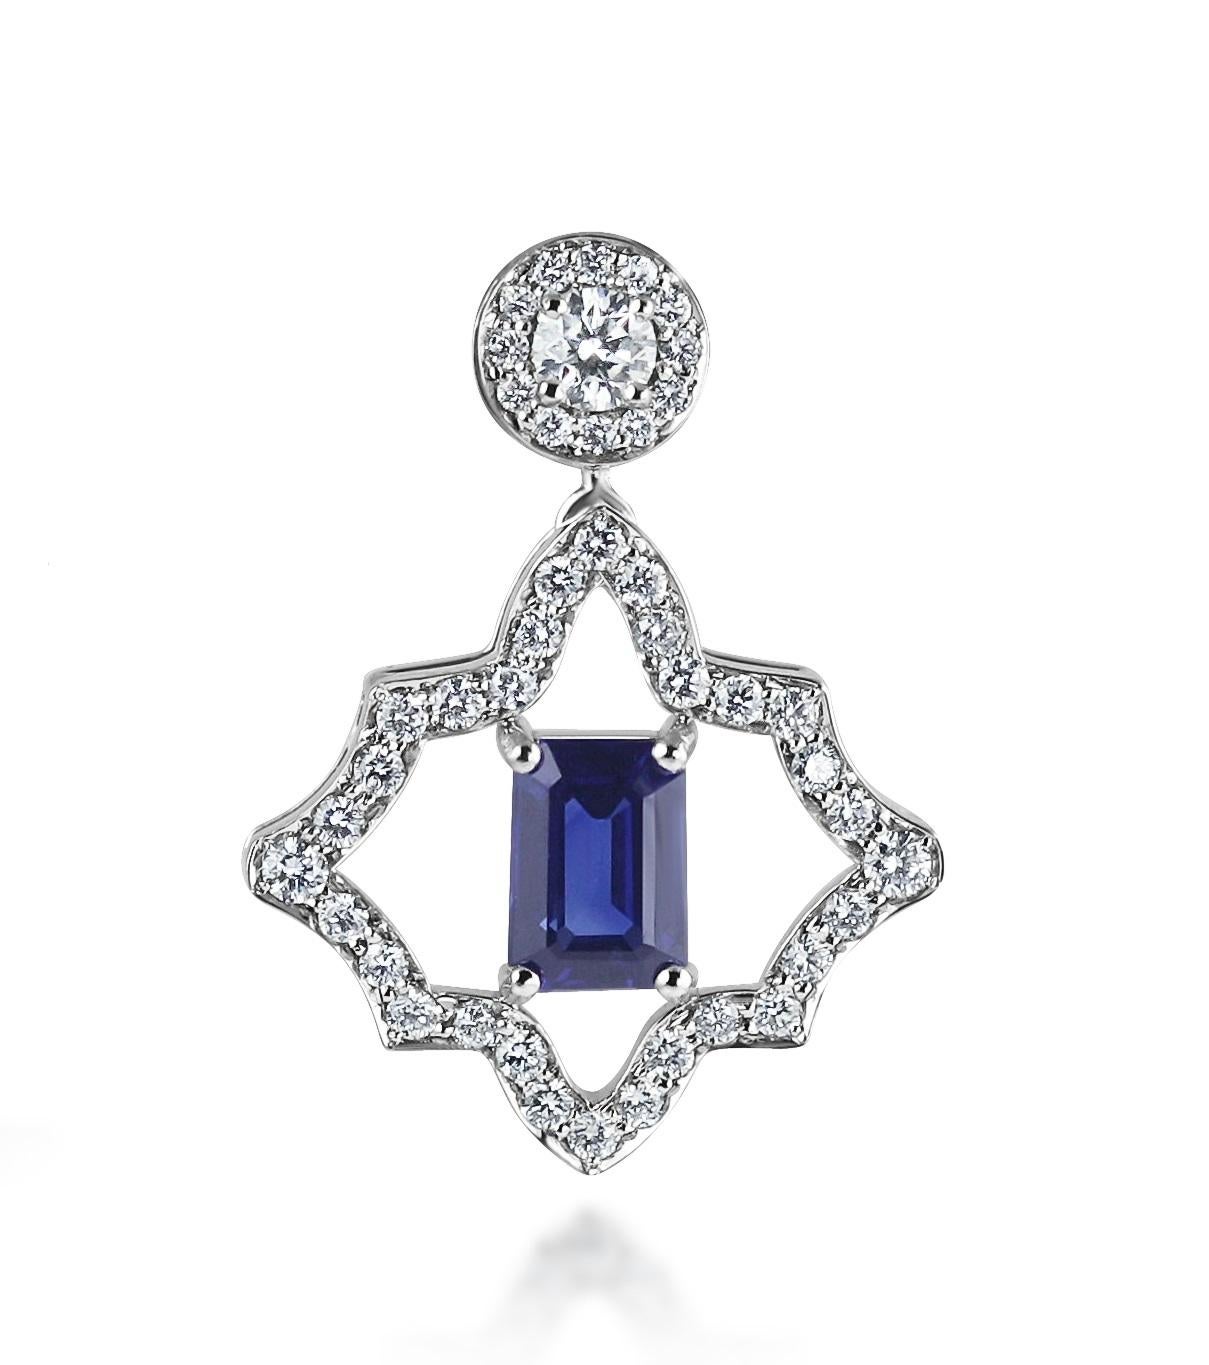 A stunning pair of diamond & sapphire stud earrings with a never ending, infinity, line of diamonds surrounding the central sapphire.  The earrings have movement to them, allowing them to sparkle even more!  

This is a very beautiful and intriguing